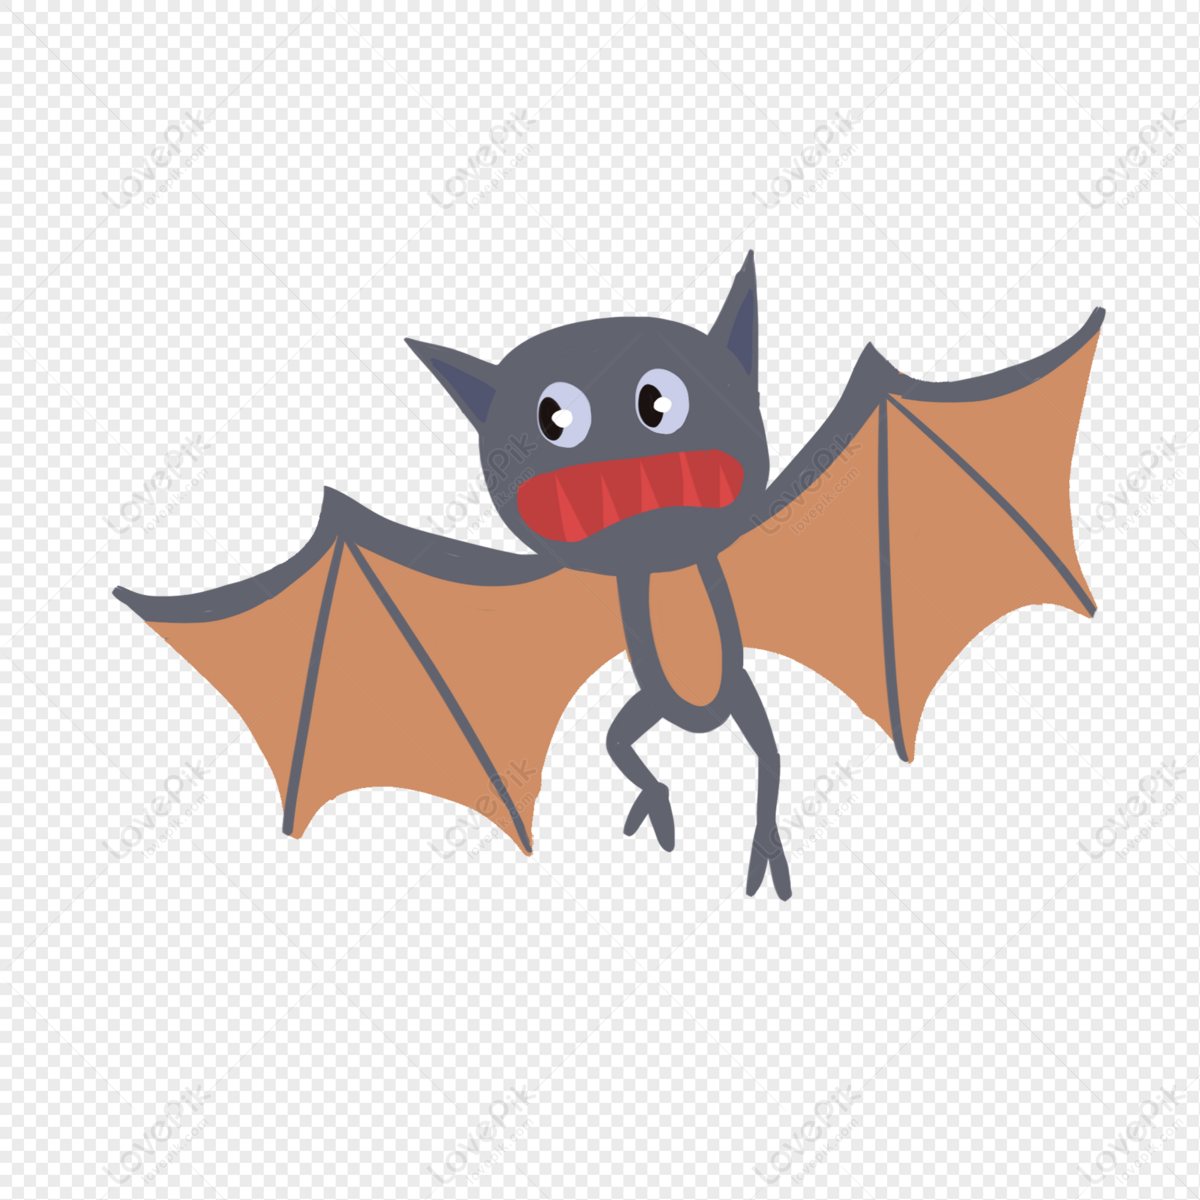 Bat PNG Hd Transparent Image And Clipart Image For Free Download ...